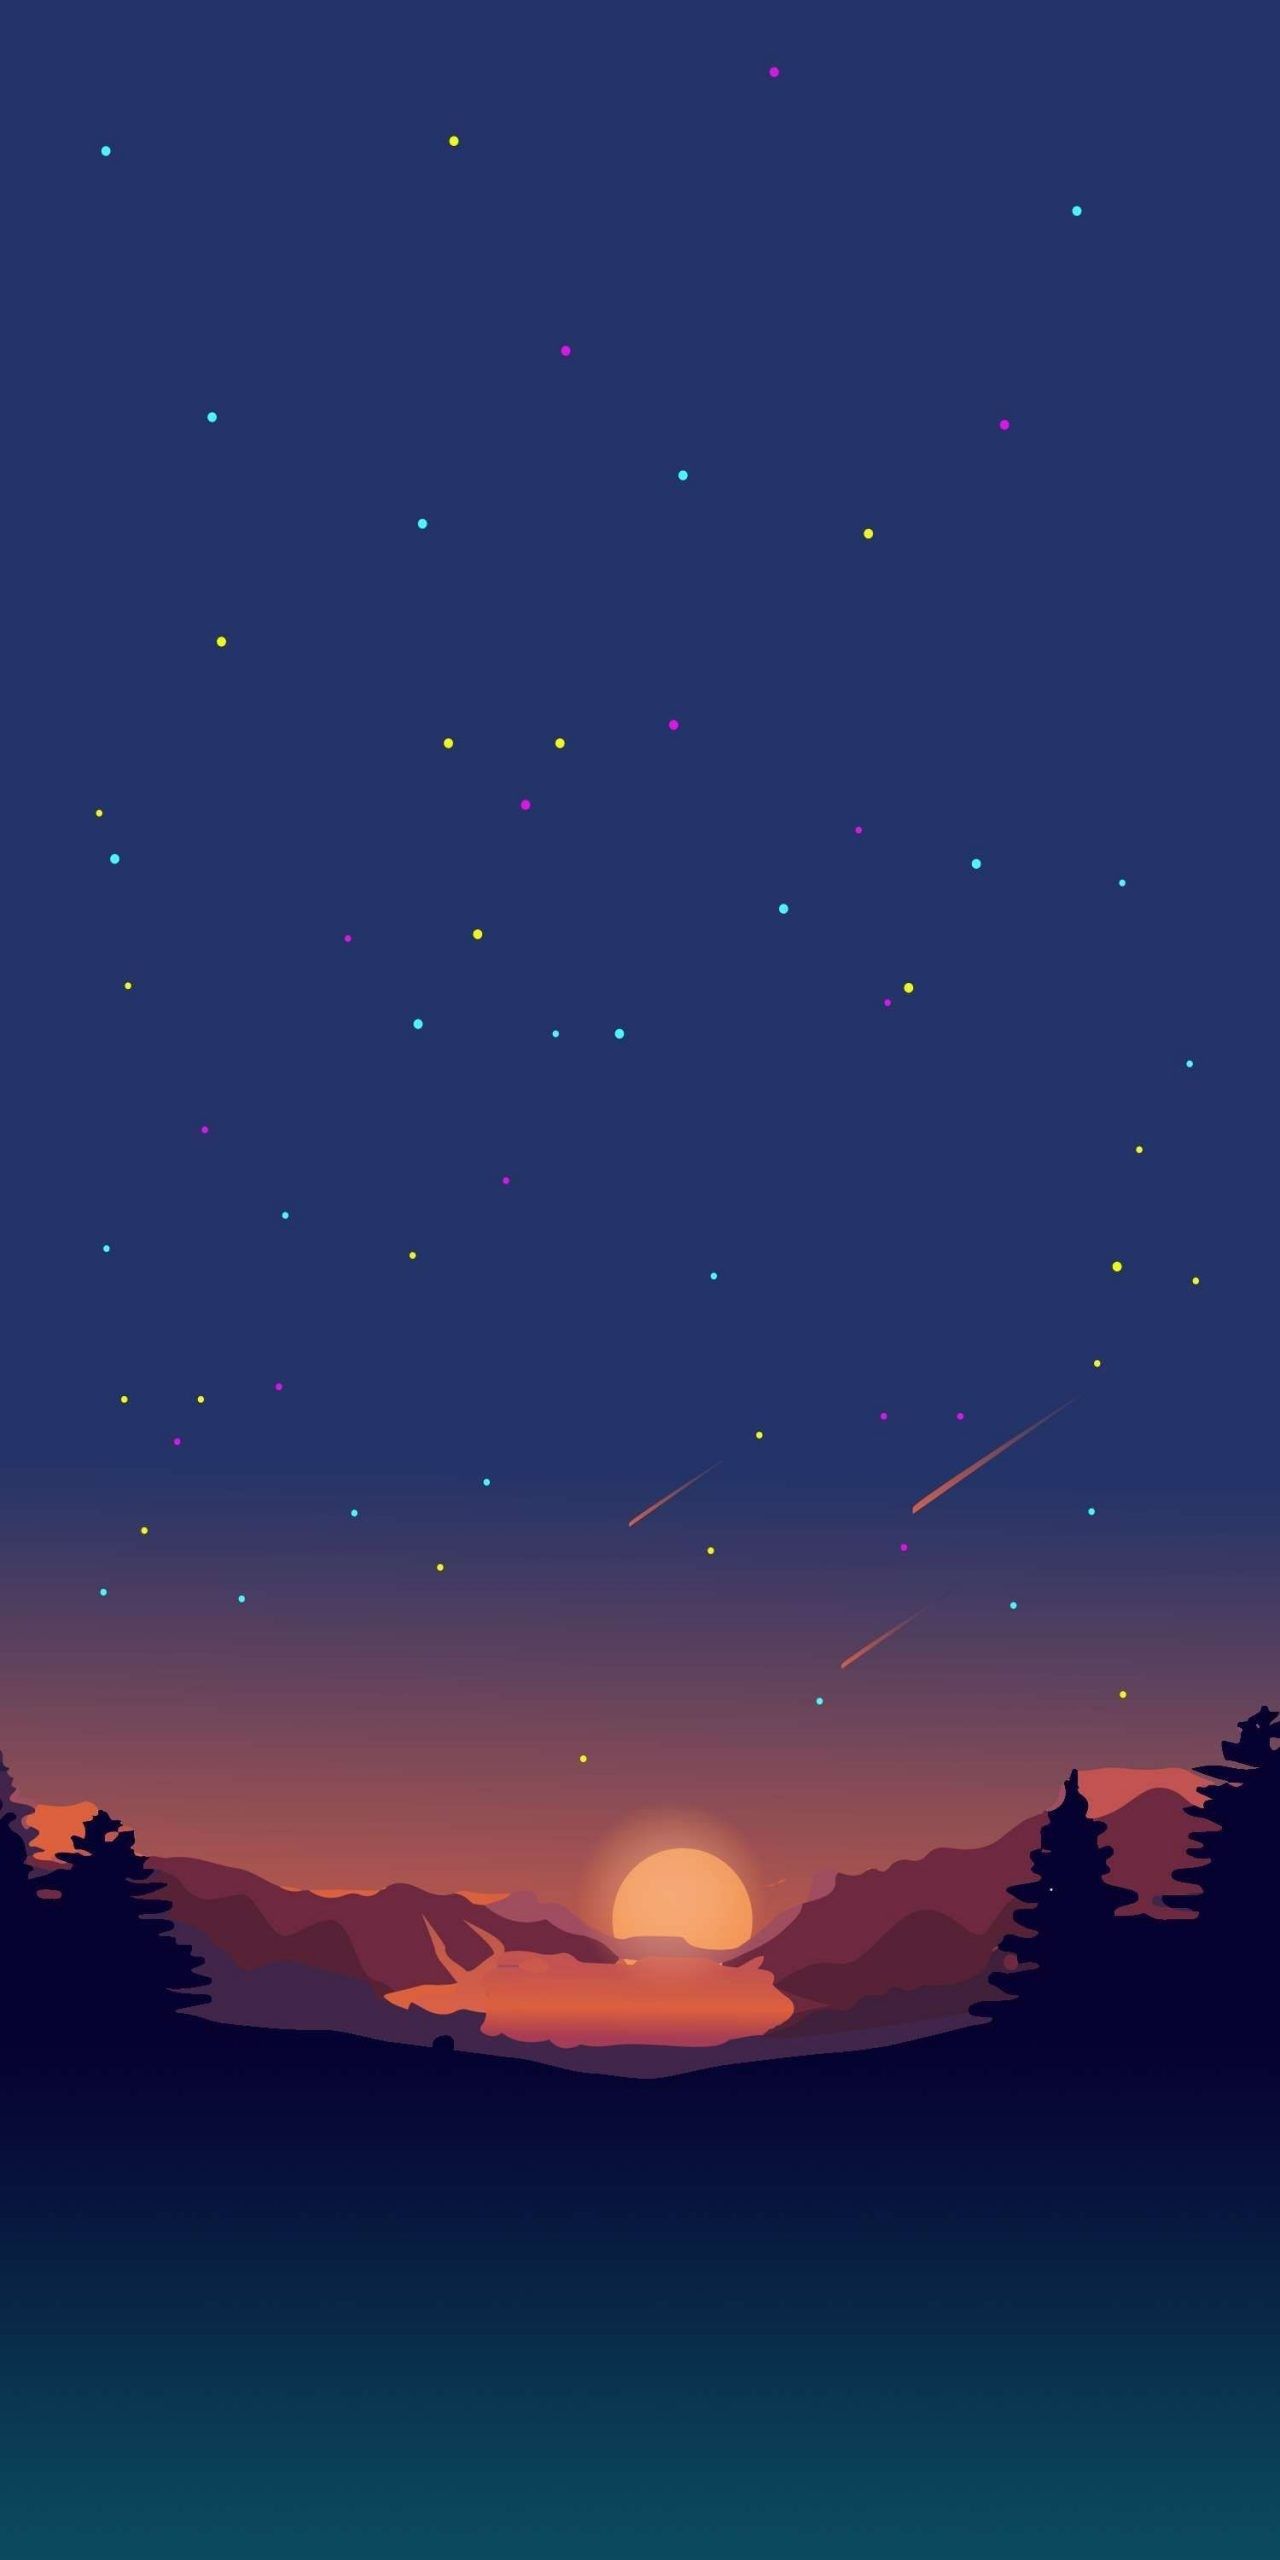 A sunset scene with stars in the sky - Pastel minimalist